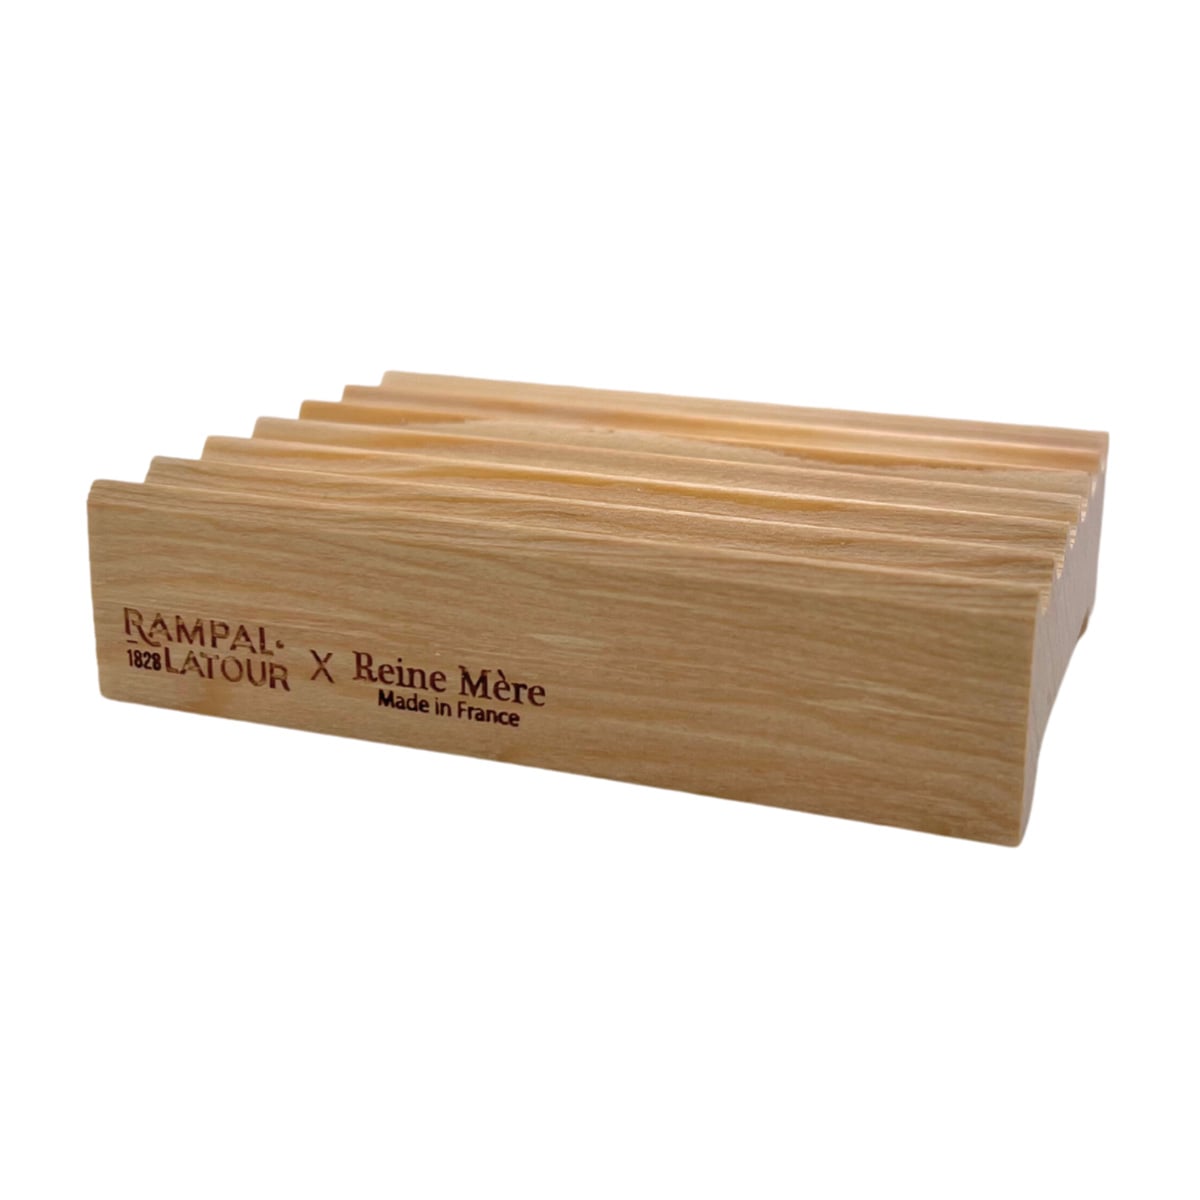 Larch wood soap dish - Queen Mother